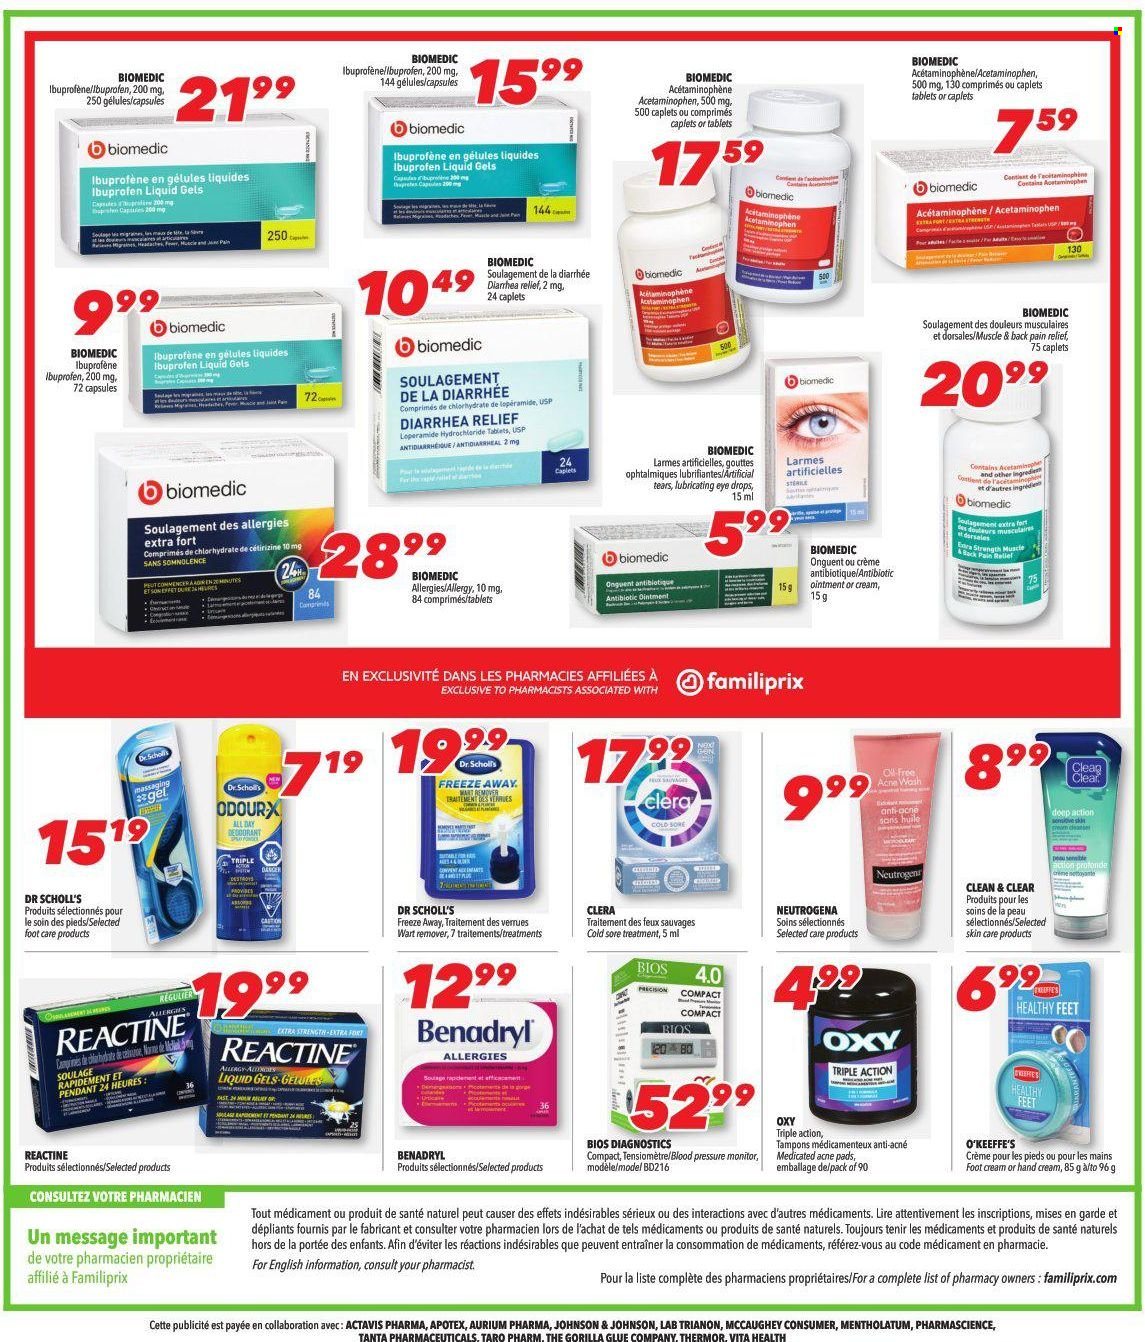 thumbnail - Familiprix Extra Flyer - January 13, 2022 - January 19, 2022 - Sales products - Johnson's, acne pad, tampons, Clean & Clear, hand cream, foot care, pressure monitor, pain relief, Ibuprofen, eye drops, Dr. Scholl's, Neutrogena. Page 5.